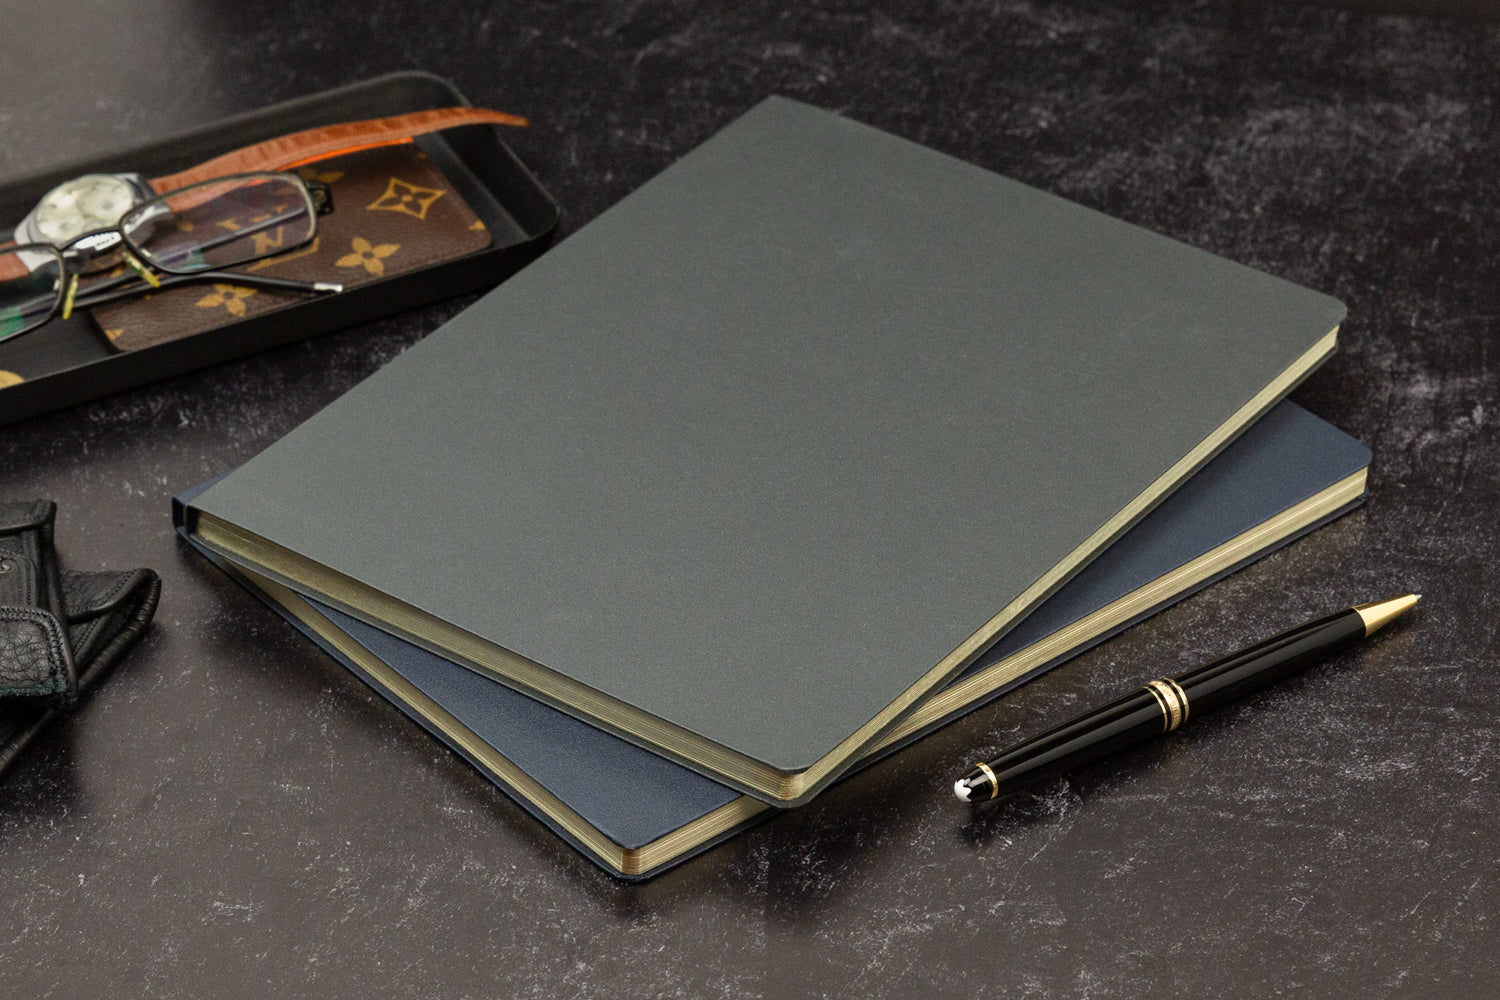 Two fancy notebooks sits on a desk with elegant accessories around them.